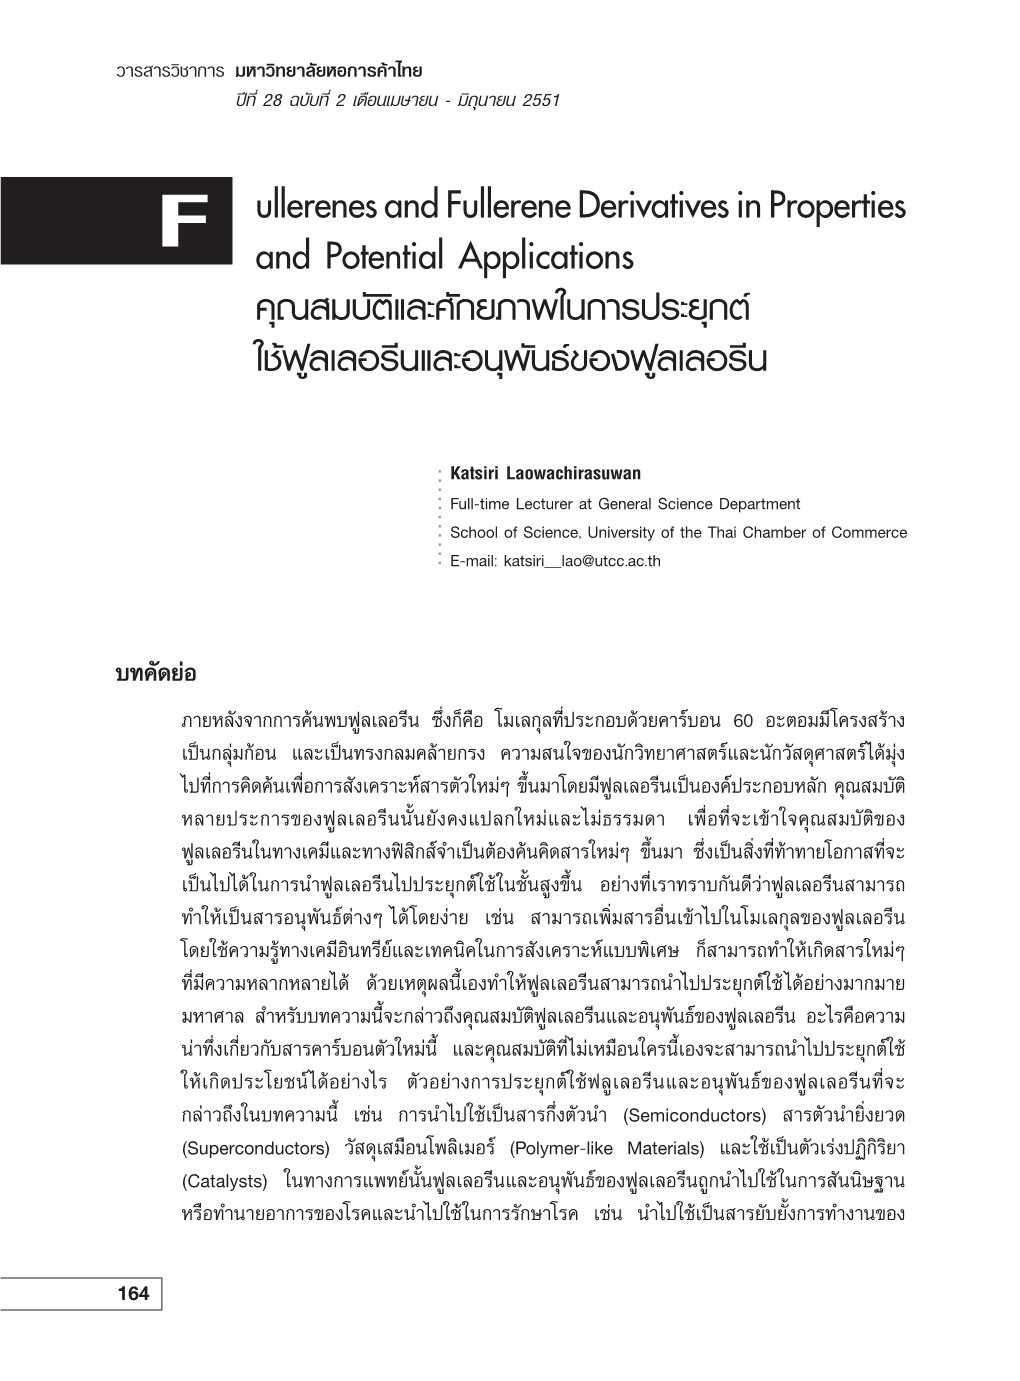 Fullerenes and Fullerene Derivatives in Properties and Potential Applications